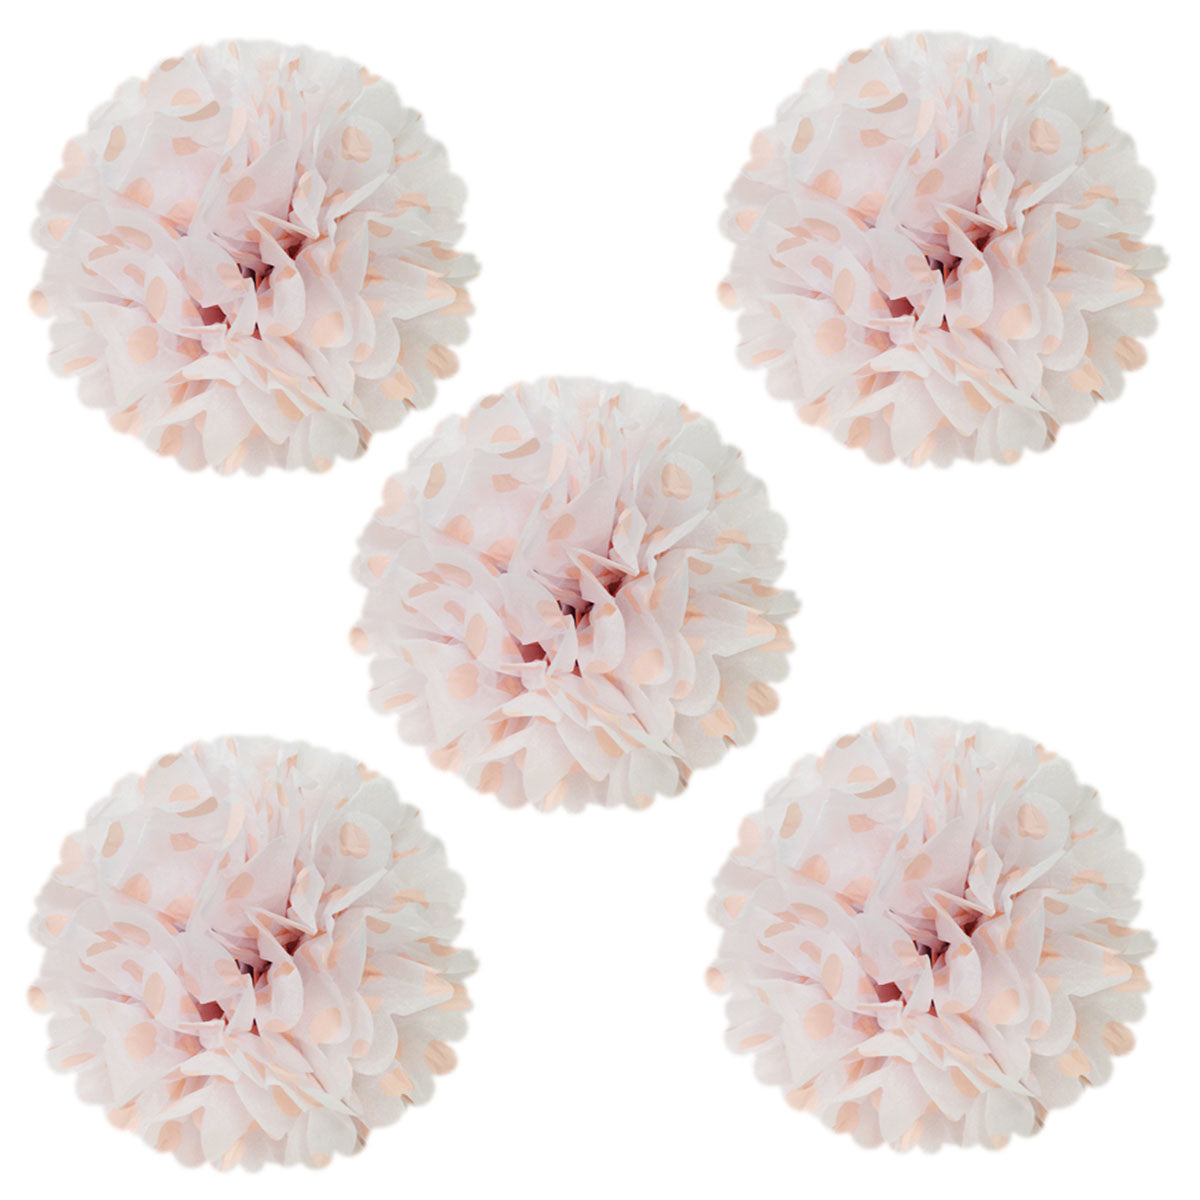 Wrapables 8" Set of 5 Tissue Pom Poms Party Decorations